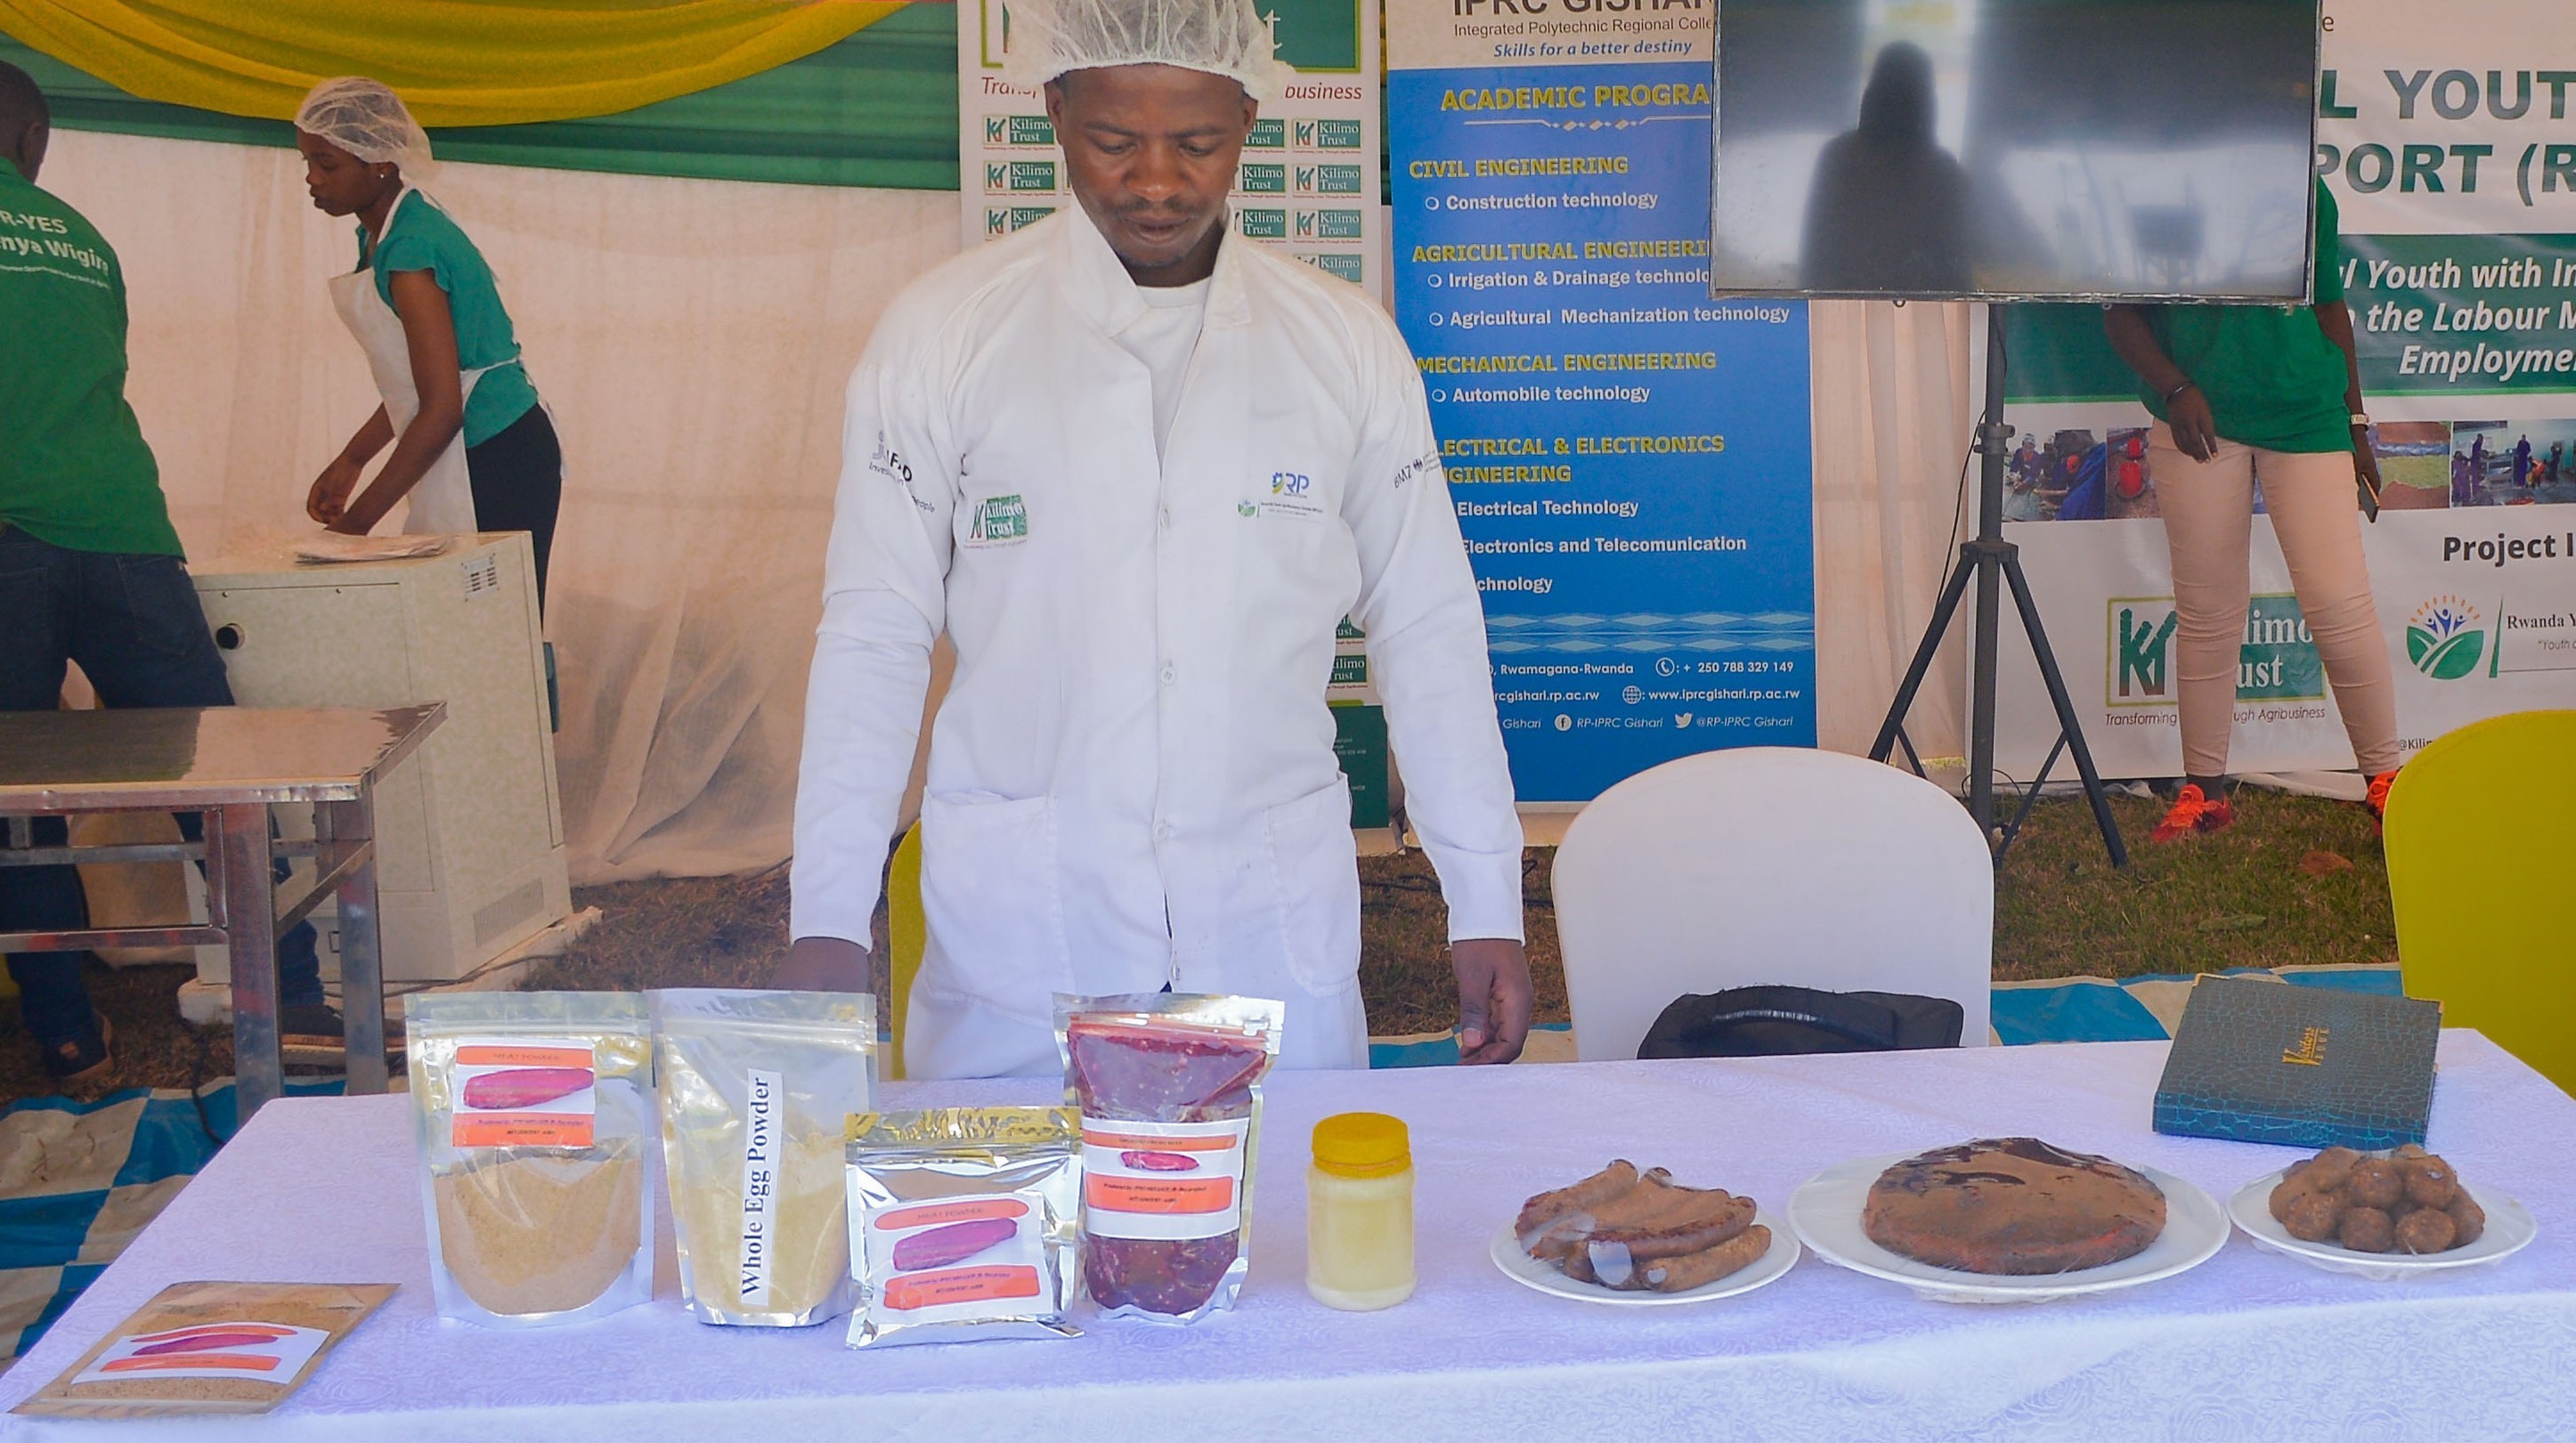 Some of the products made by beneficiaries of R-YES project at a stand at the agricultural exhibition which took place at Mulindi expo grounds in Kigali. / Photos: Courtesy.